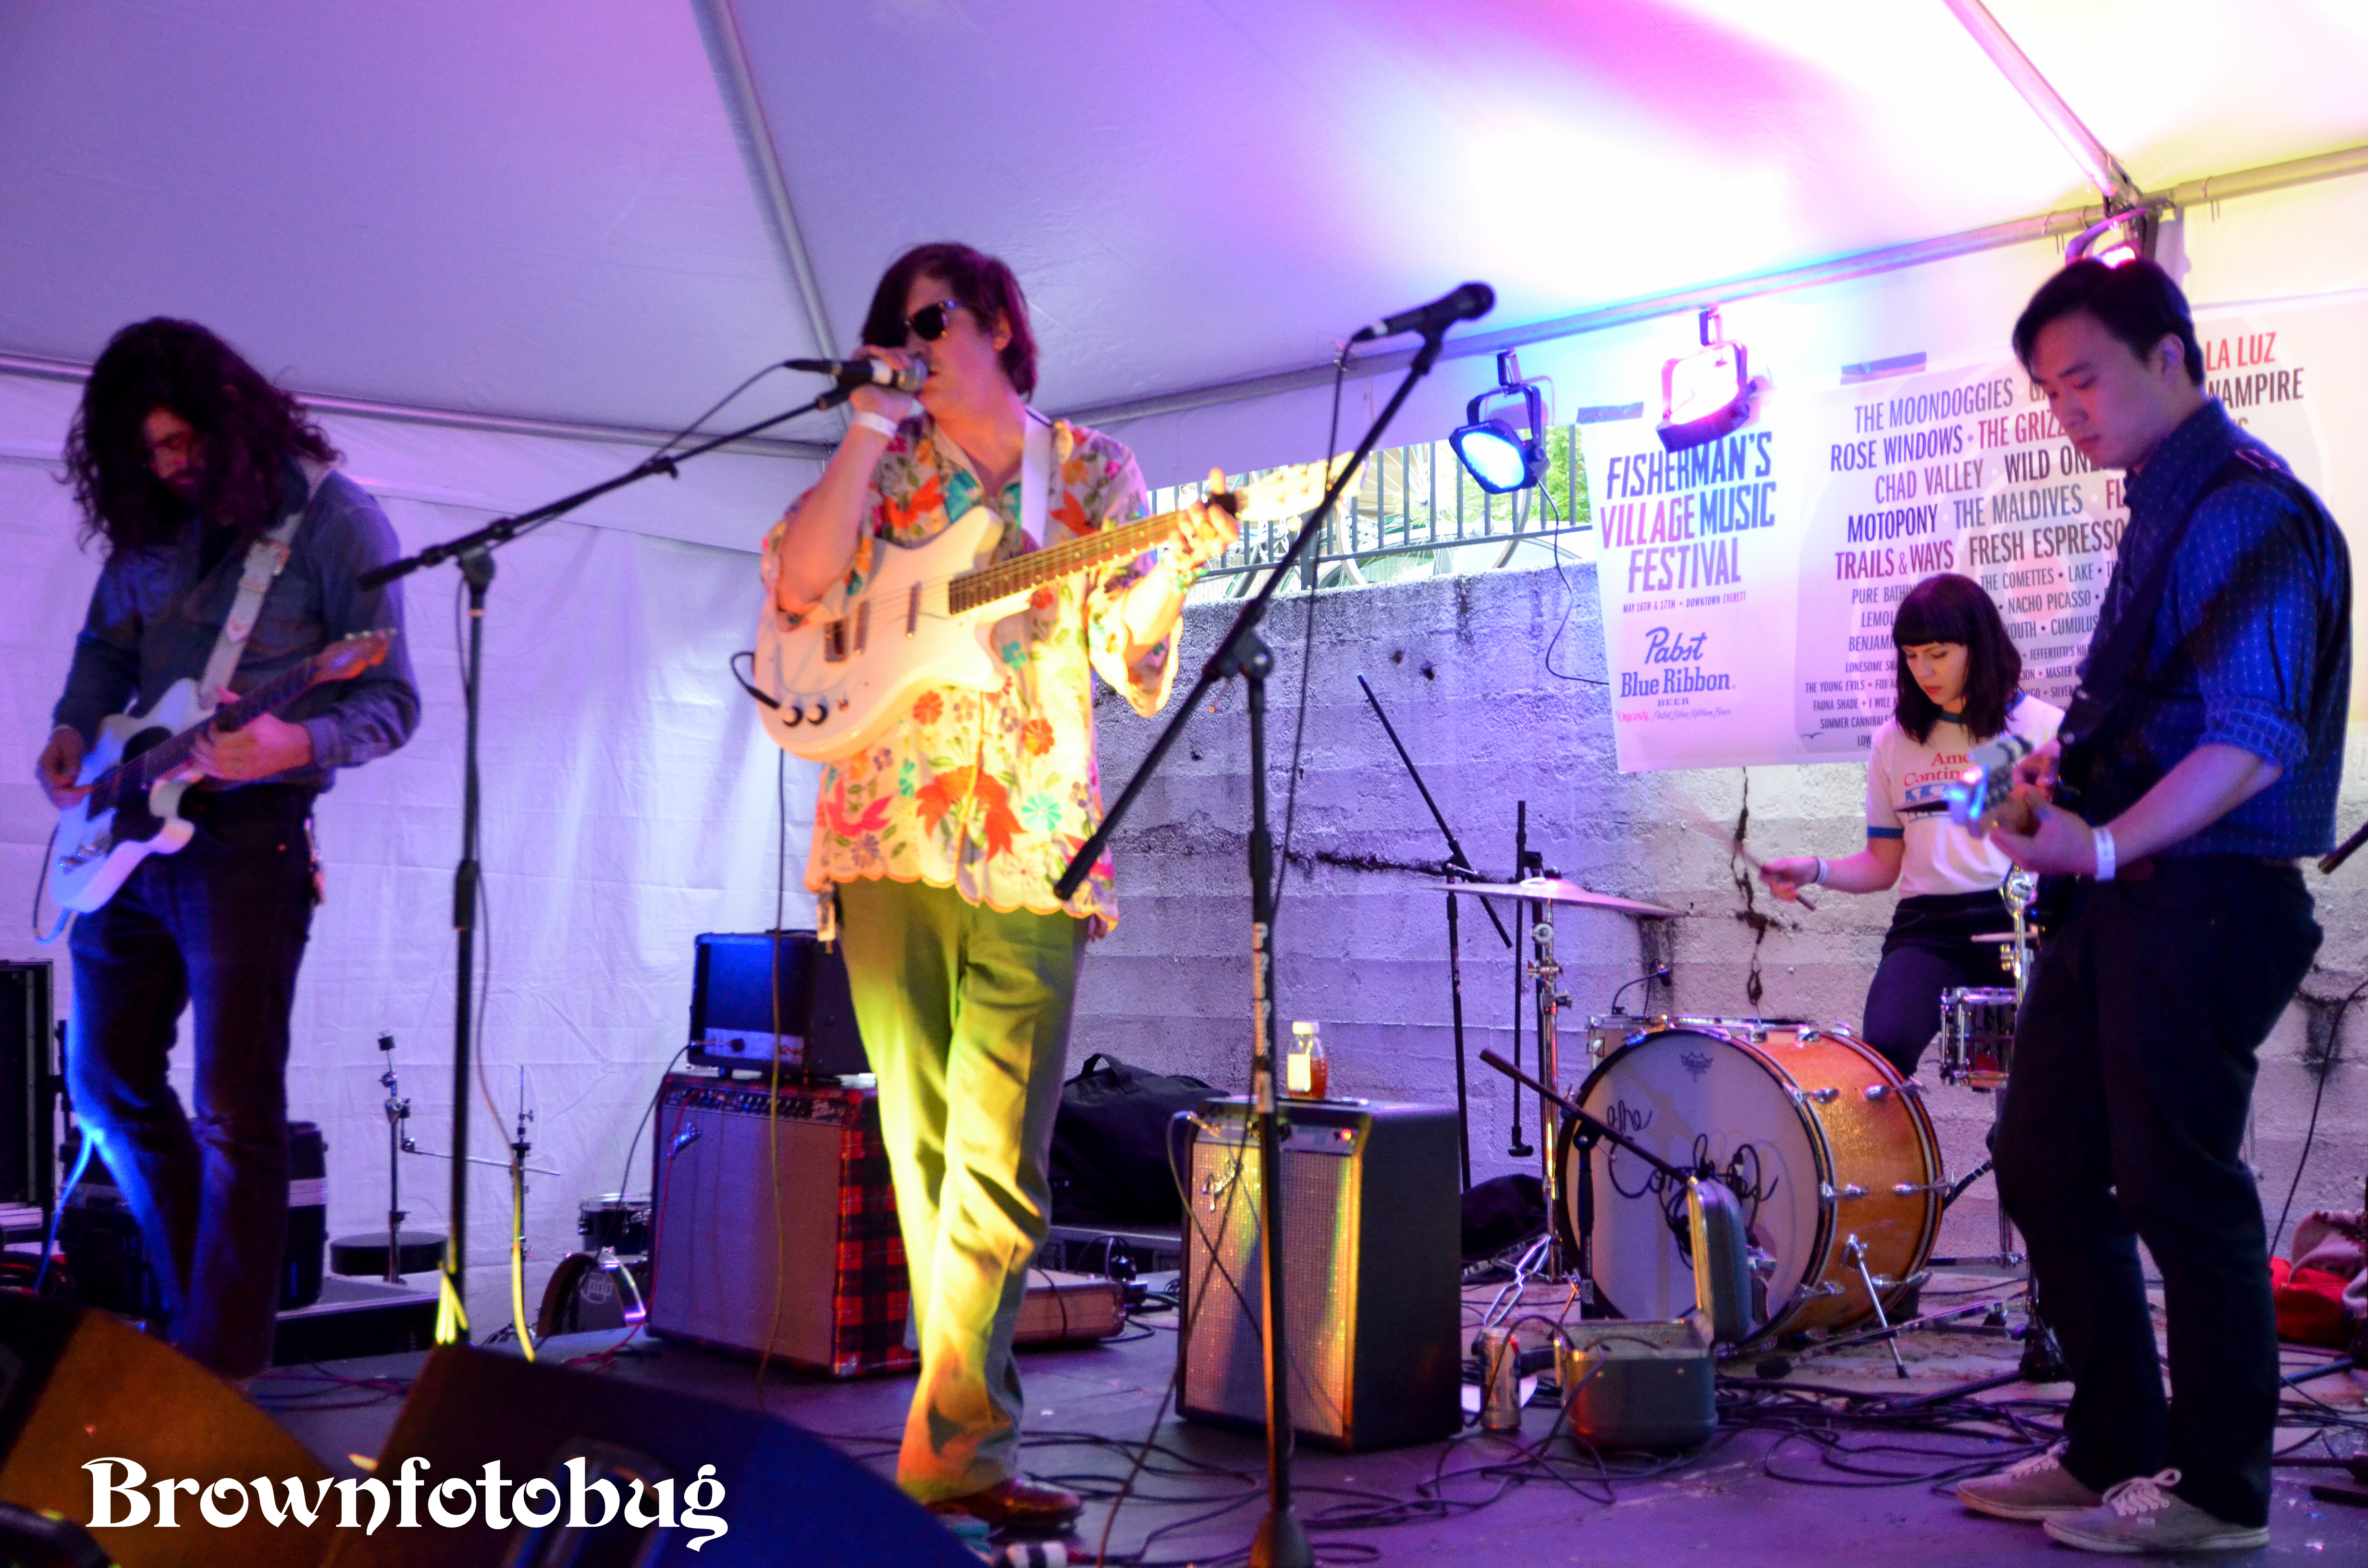 Comettes Live at Fishermans Village Music Festival (Photo by Arlene Brown)